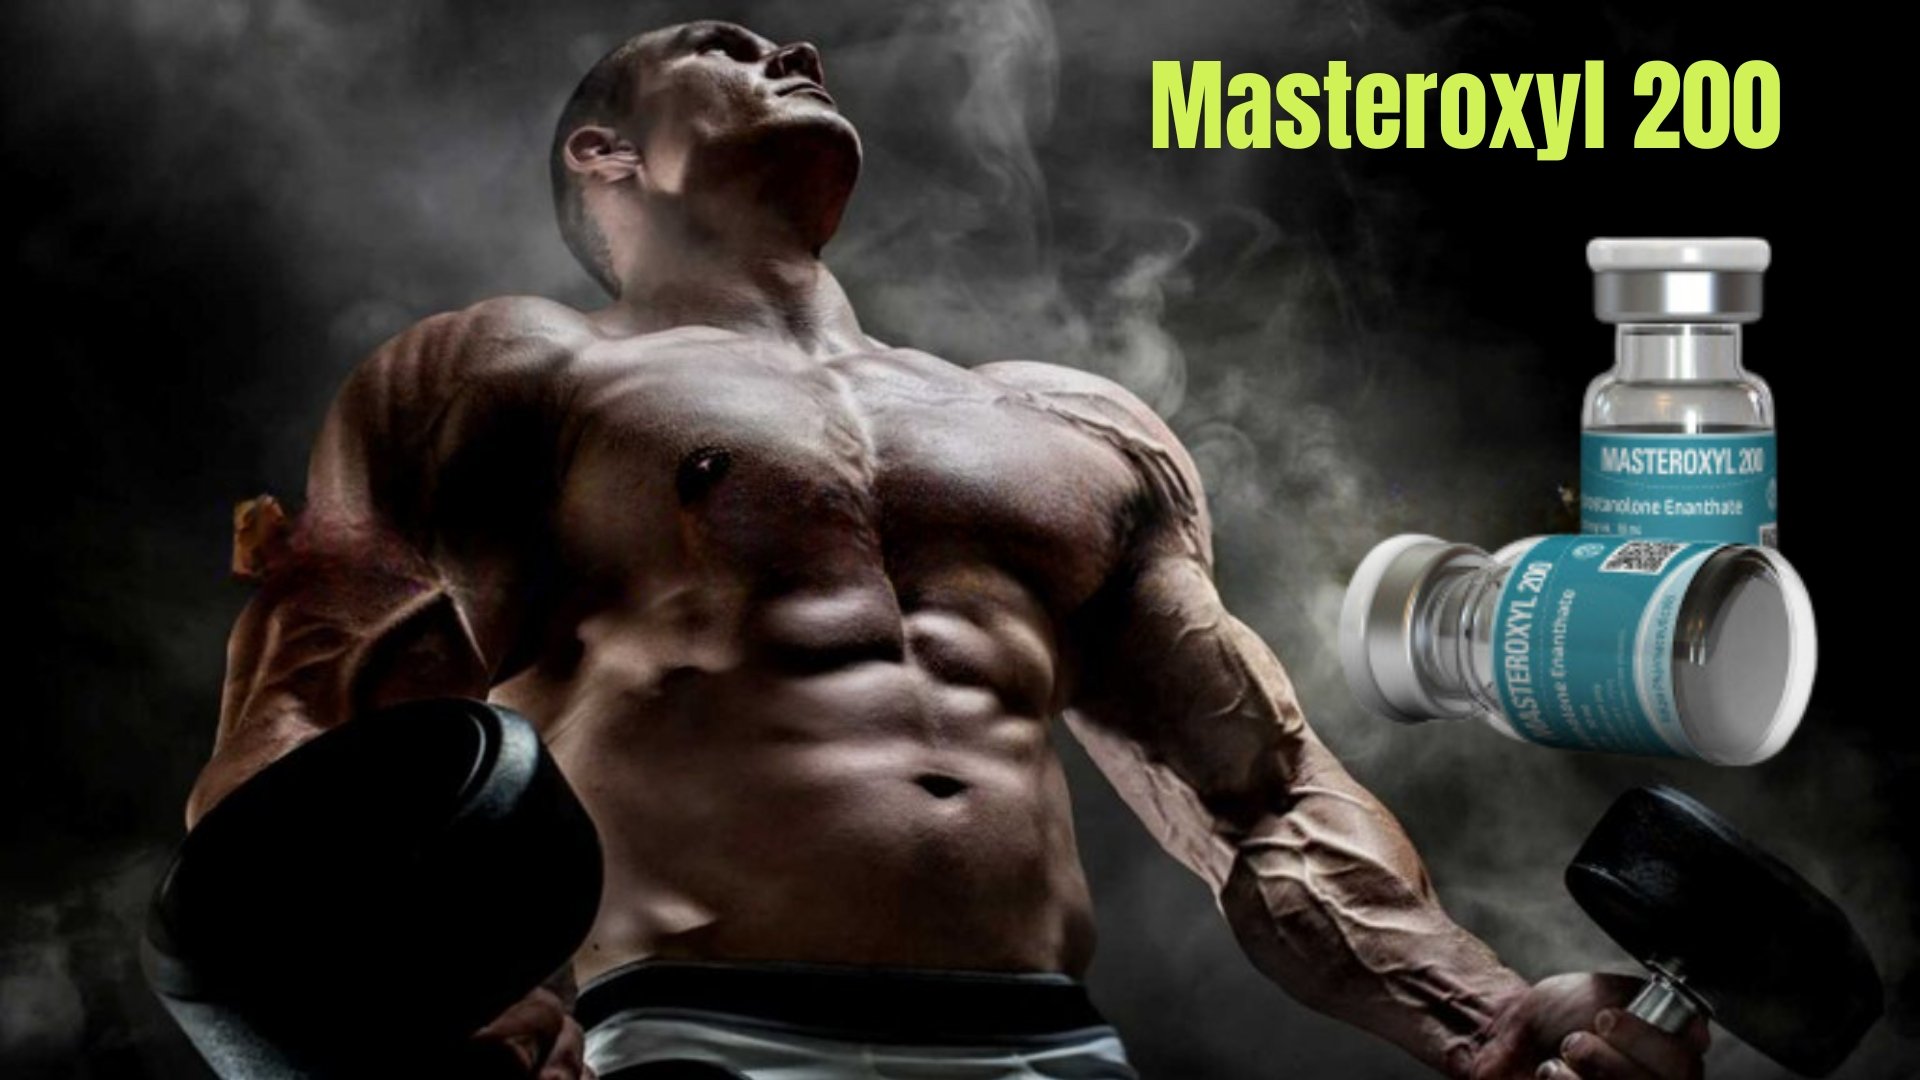 Articles Image Buy Masteroxyl 200, a Non-Aromatizing Steroid